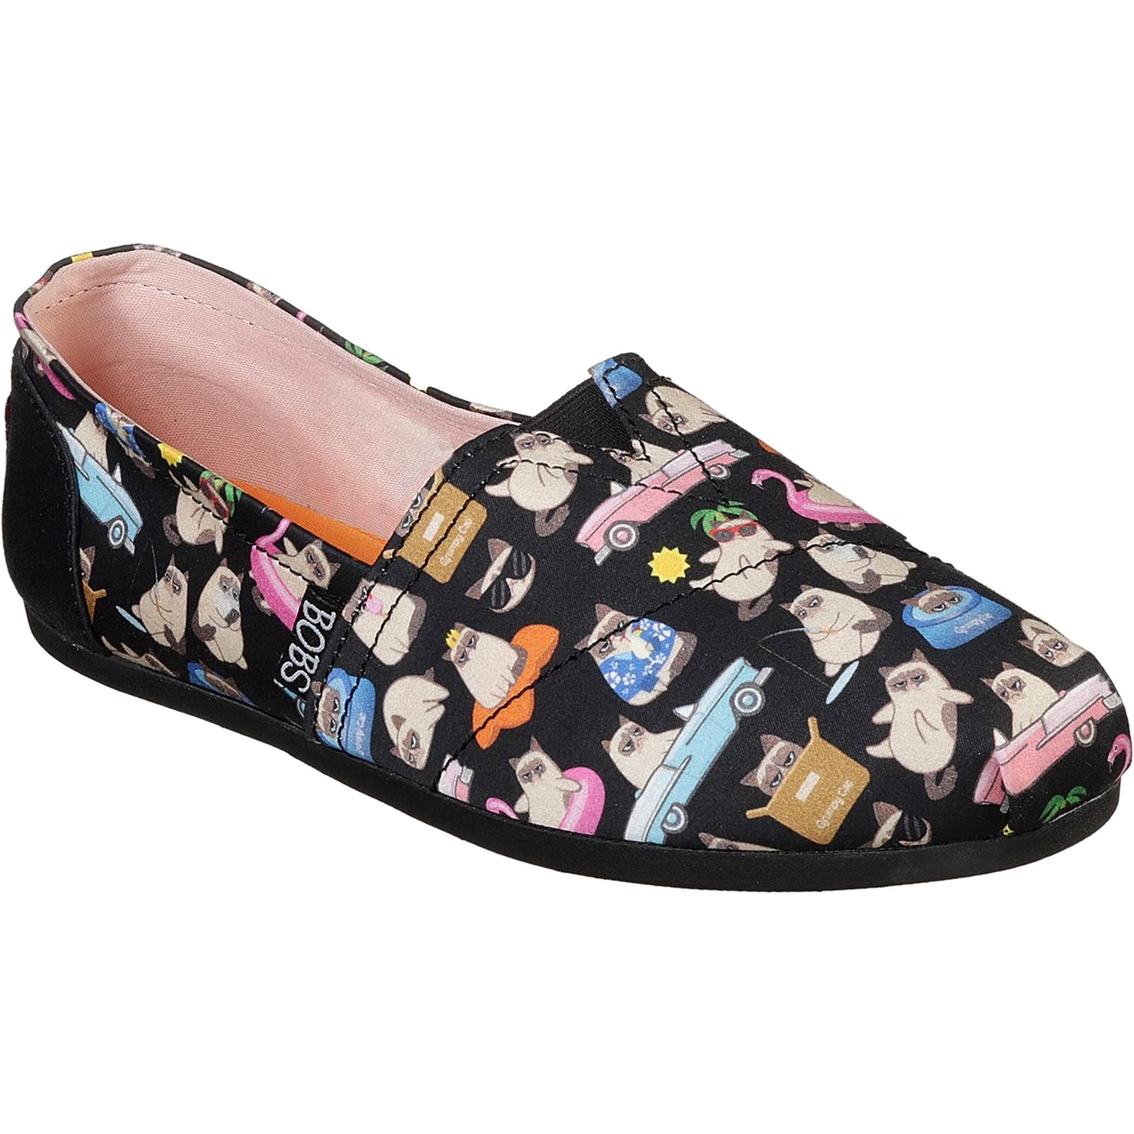 skechers shoes with cats on them